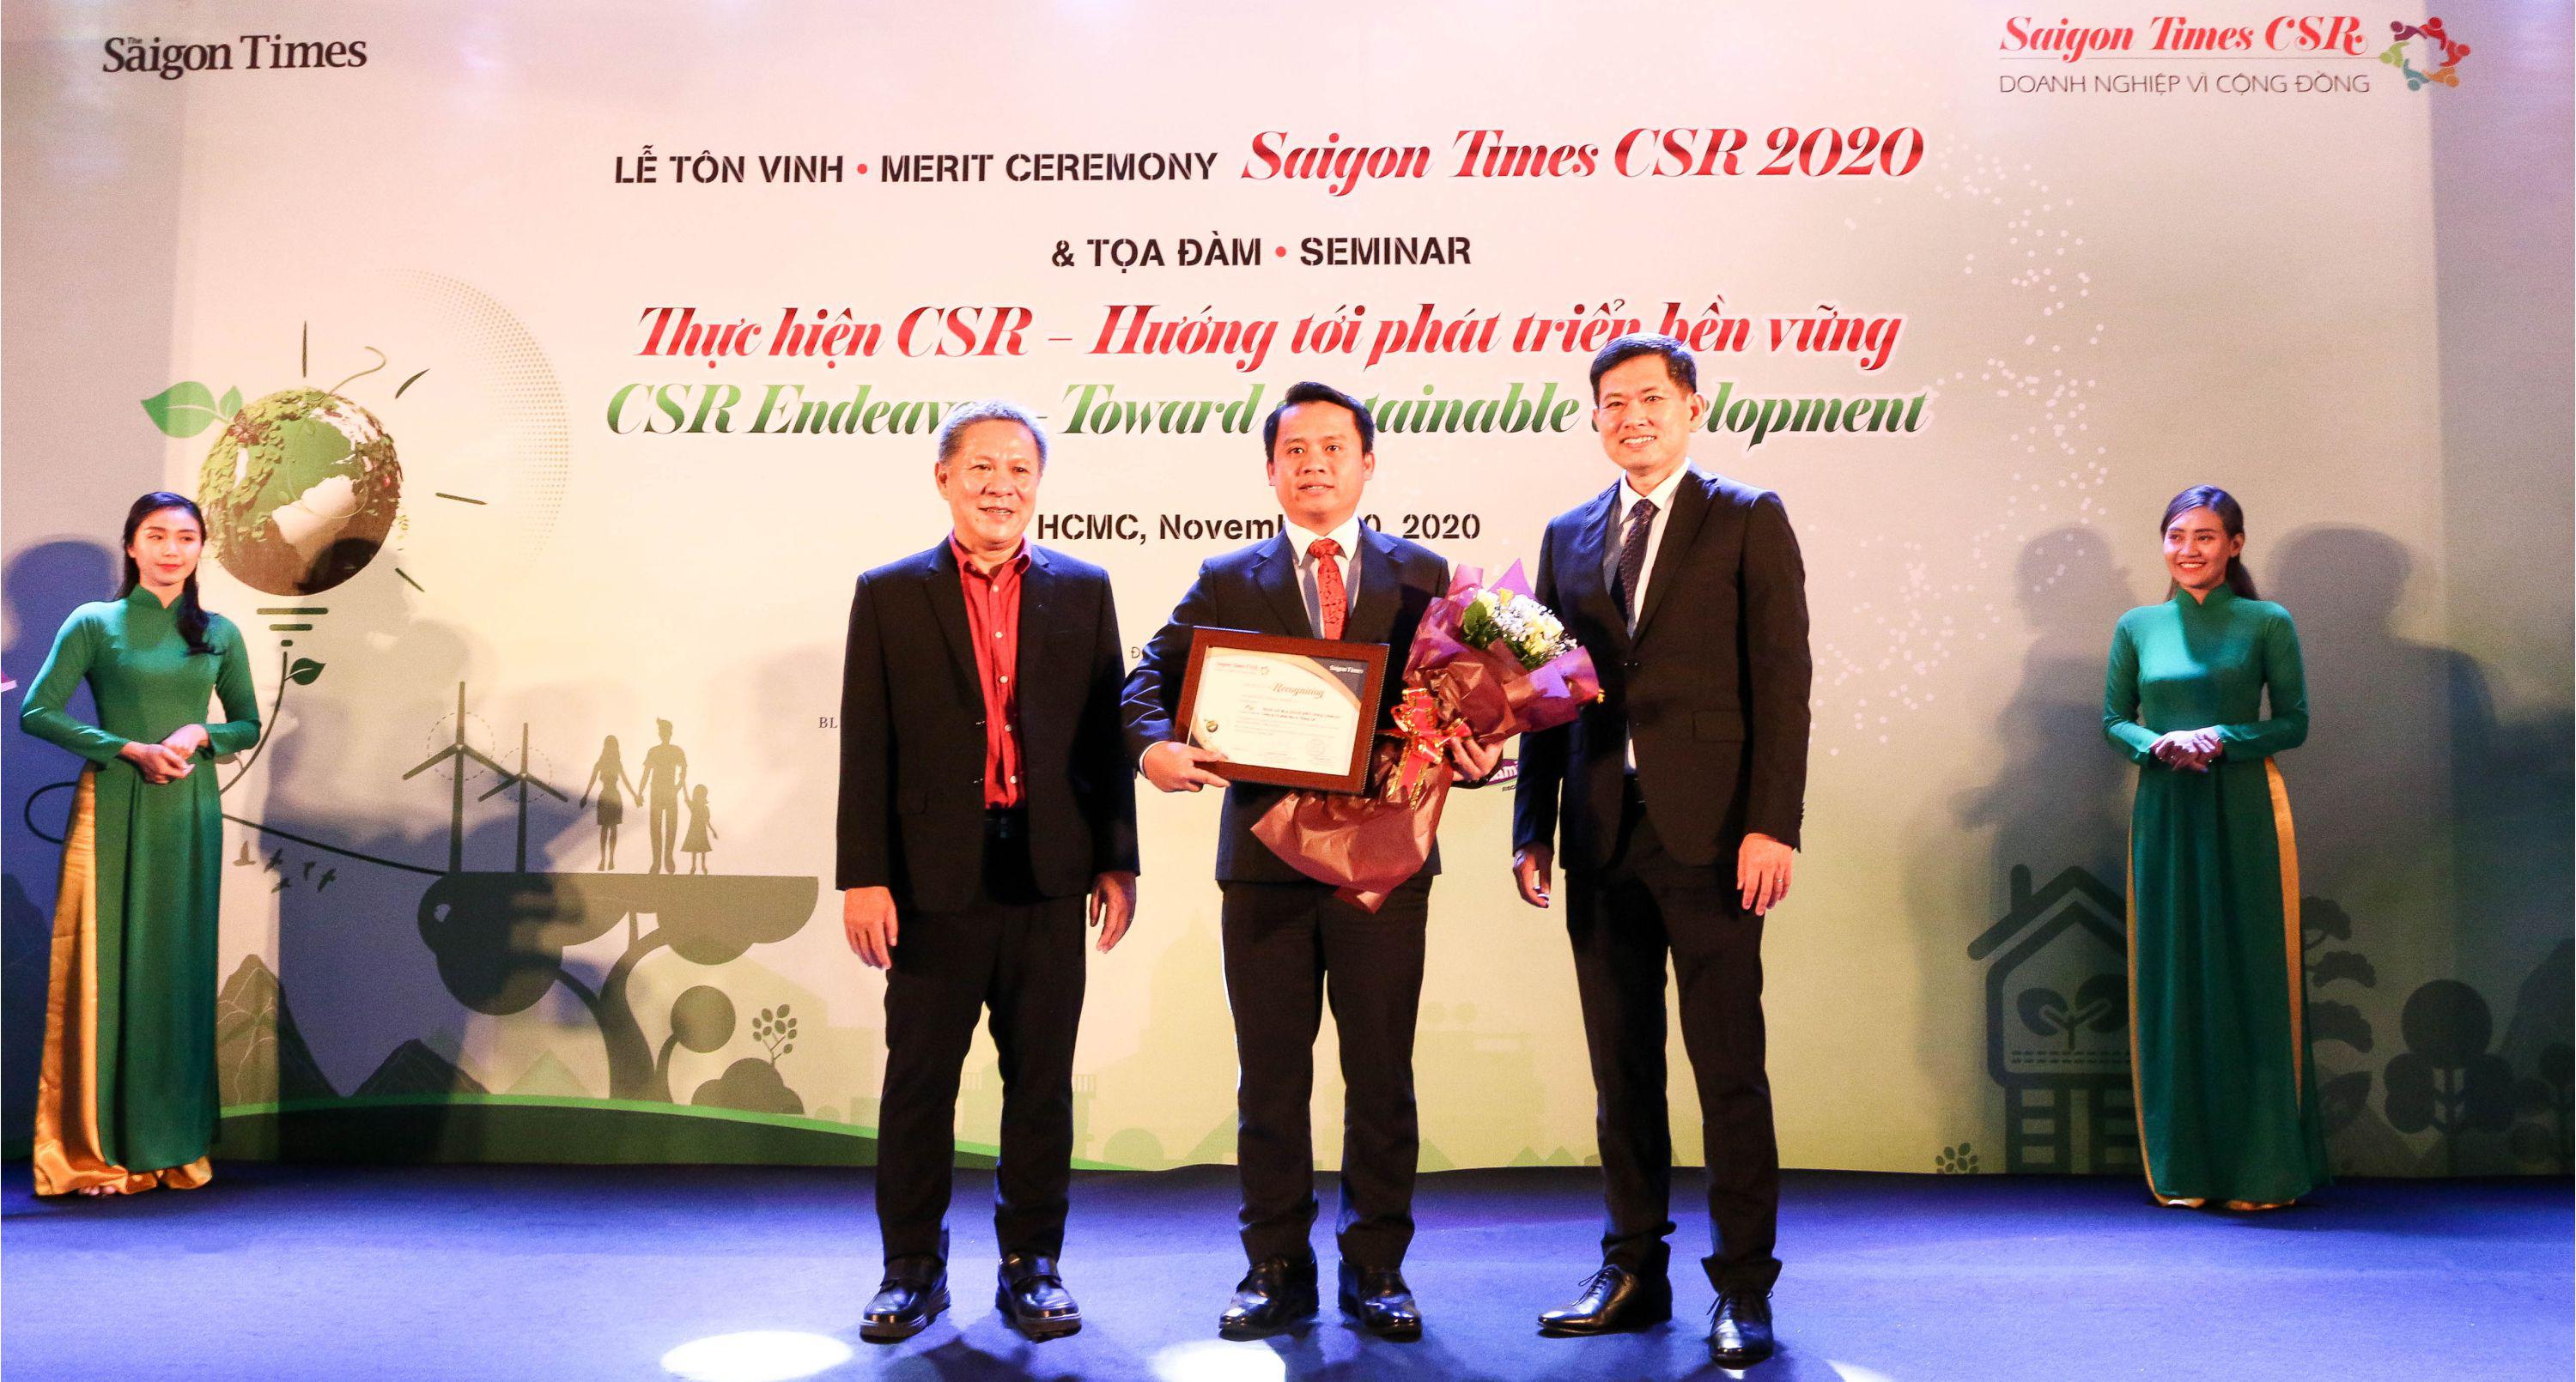 Thang Loi Group is honored Corporate Social Responsibility (CSR) Award in 2020